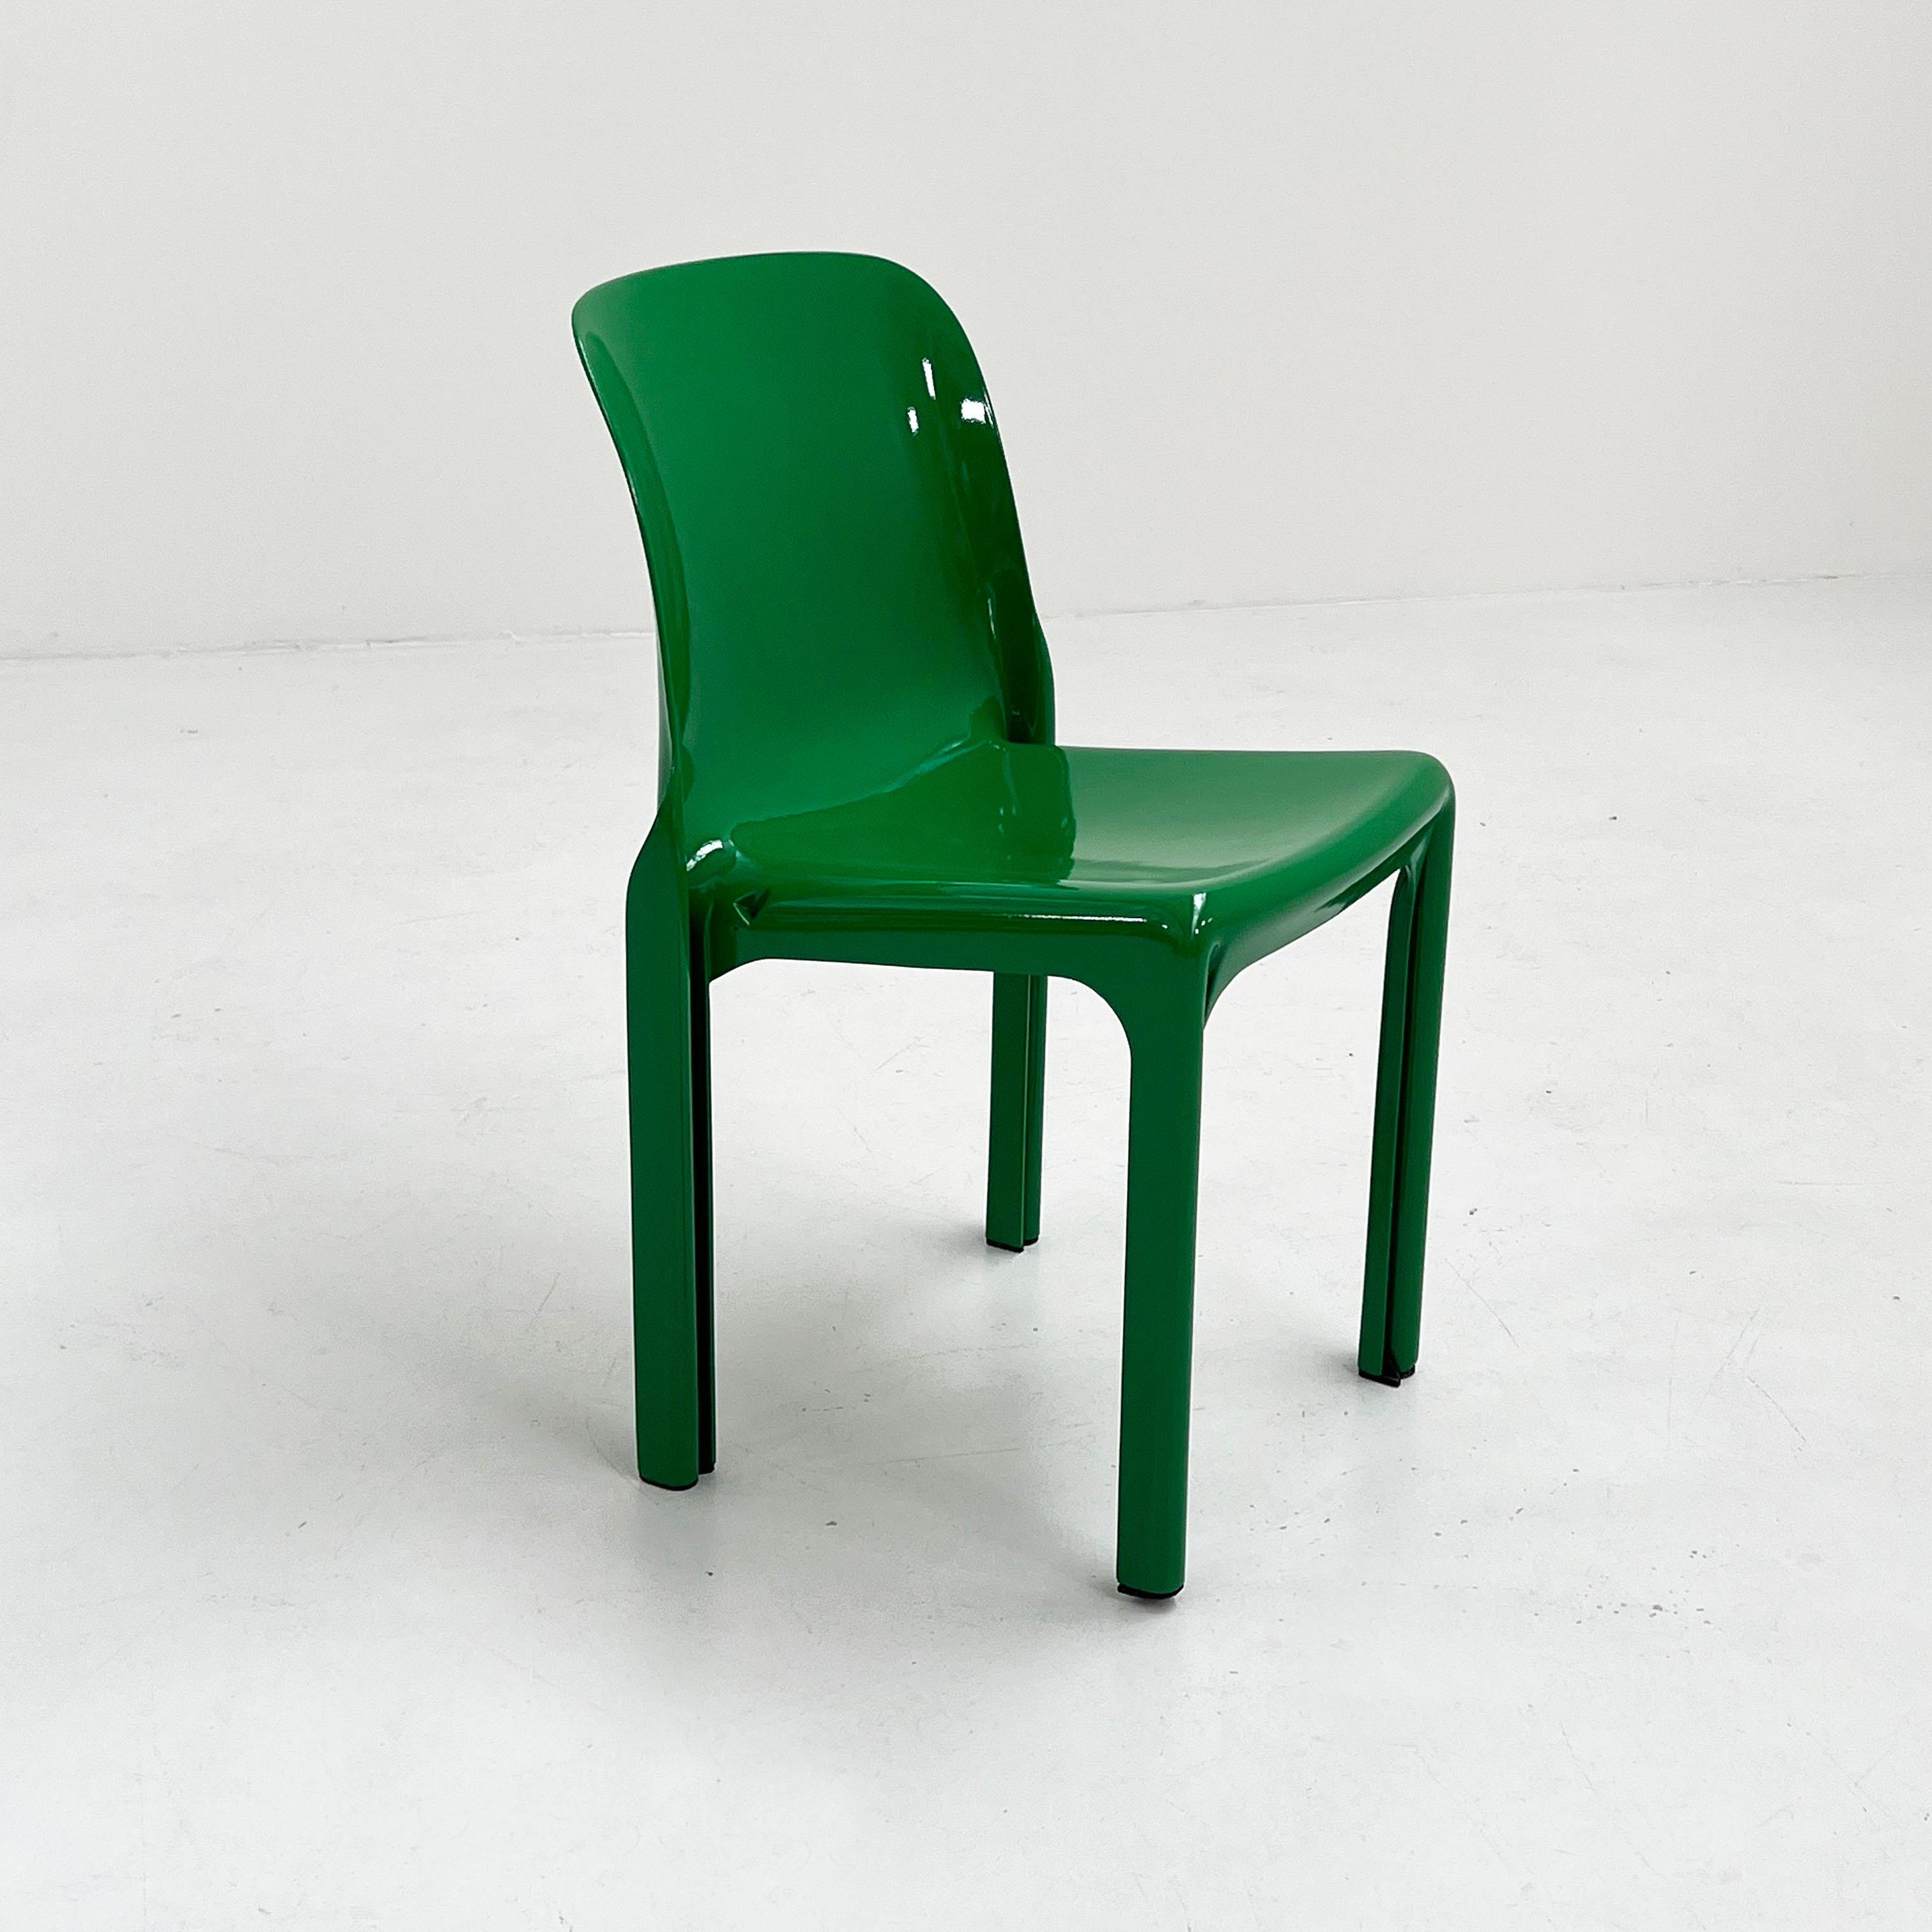 Designer - Vico Magistretti
Producer - Artemide
Model - Selene Chair
Design Period - Seventies
Measurements - Width 47 cm x Depth 50 cm x Height 76 cm x Seat Height 48 cm
Materials - Plastic
Color - Green
Light wear consistent with age and